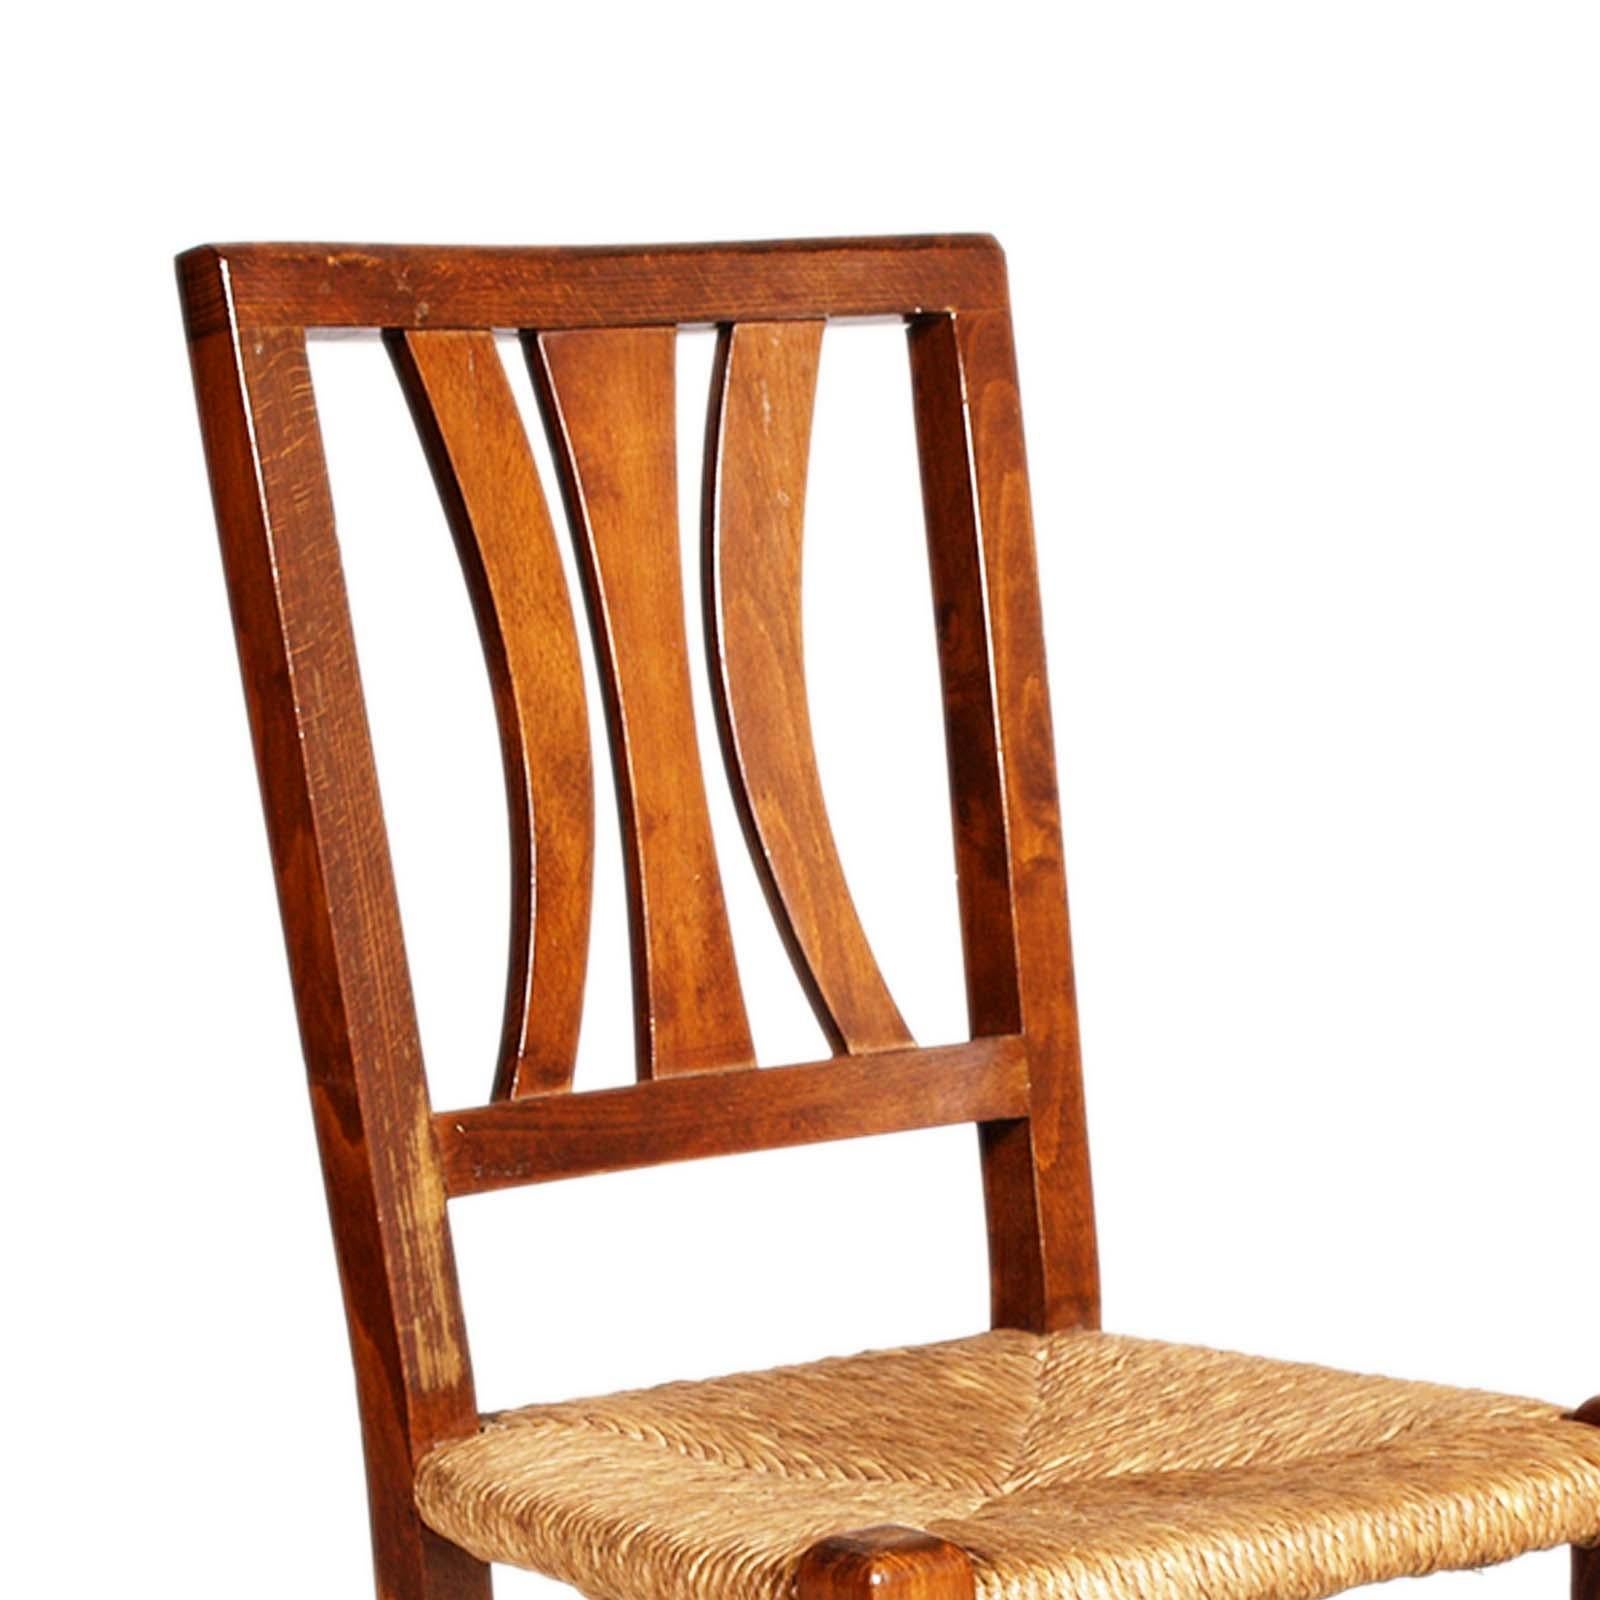 Ancient Asolan hand-made chair, with straw seat, from the early 1900s, full of charm

The Asolana chair is normally used as a 